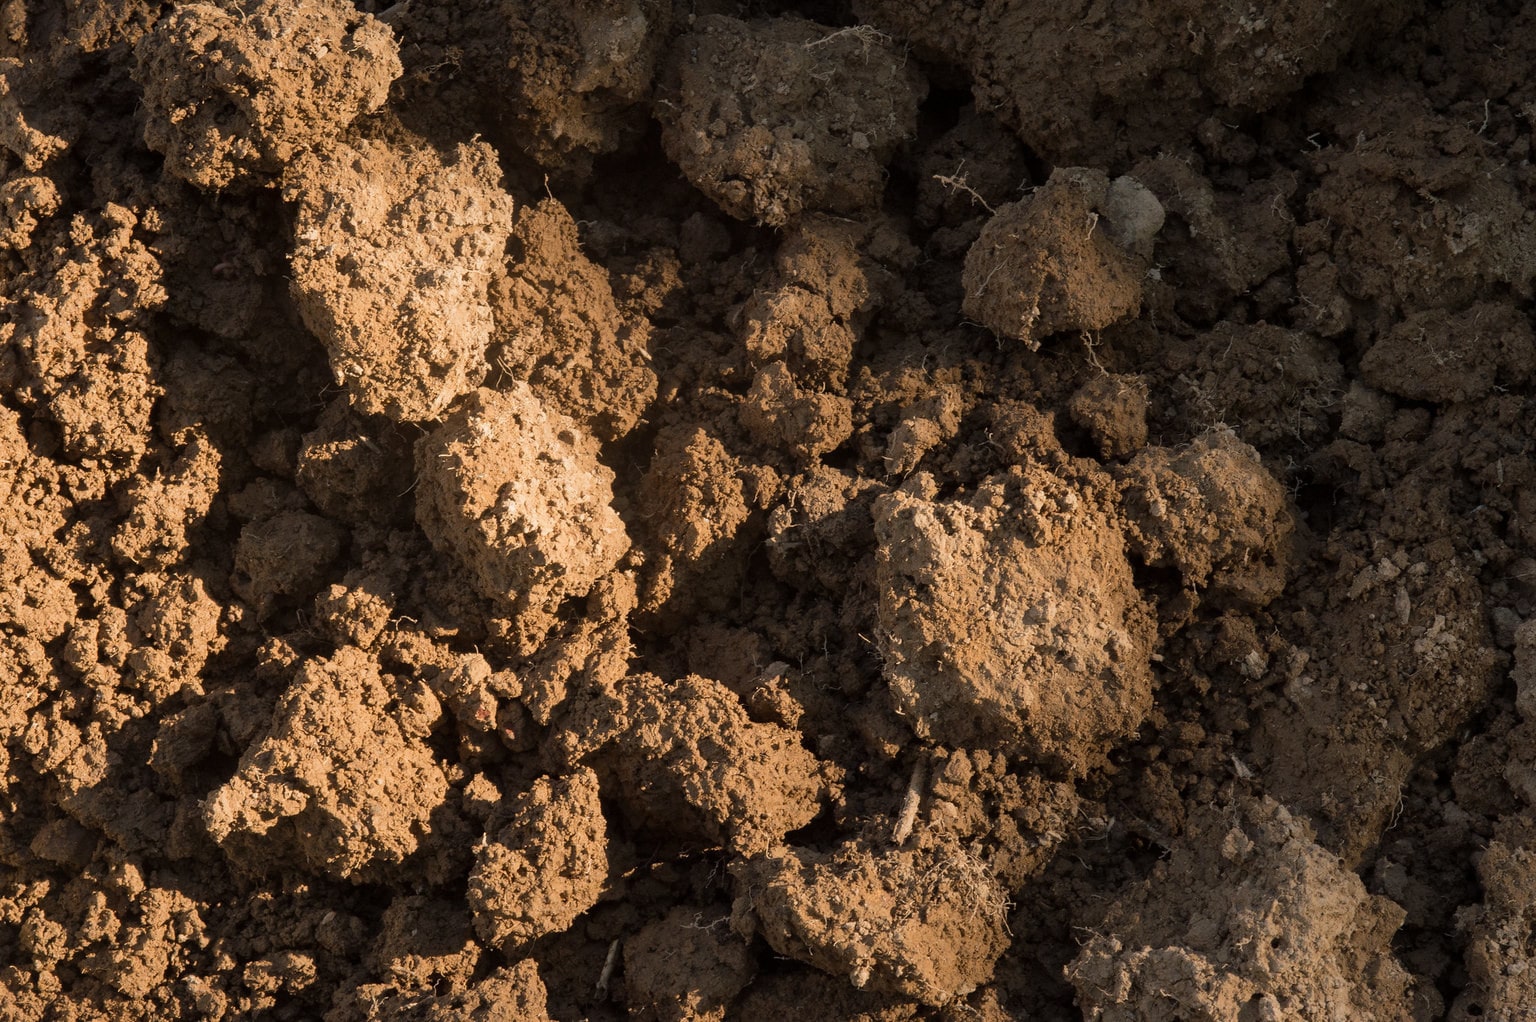 moist healthy soil. USDA photo by Lance Cheung